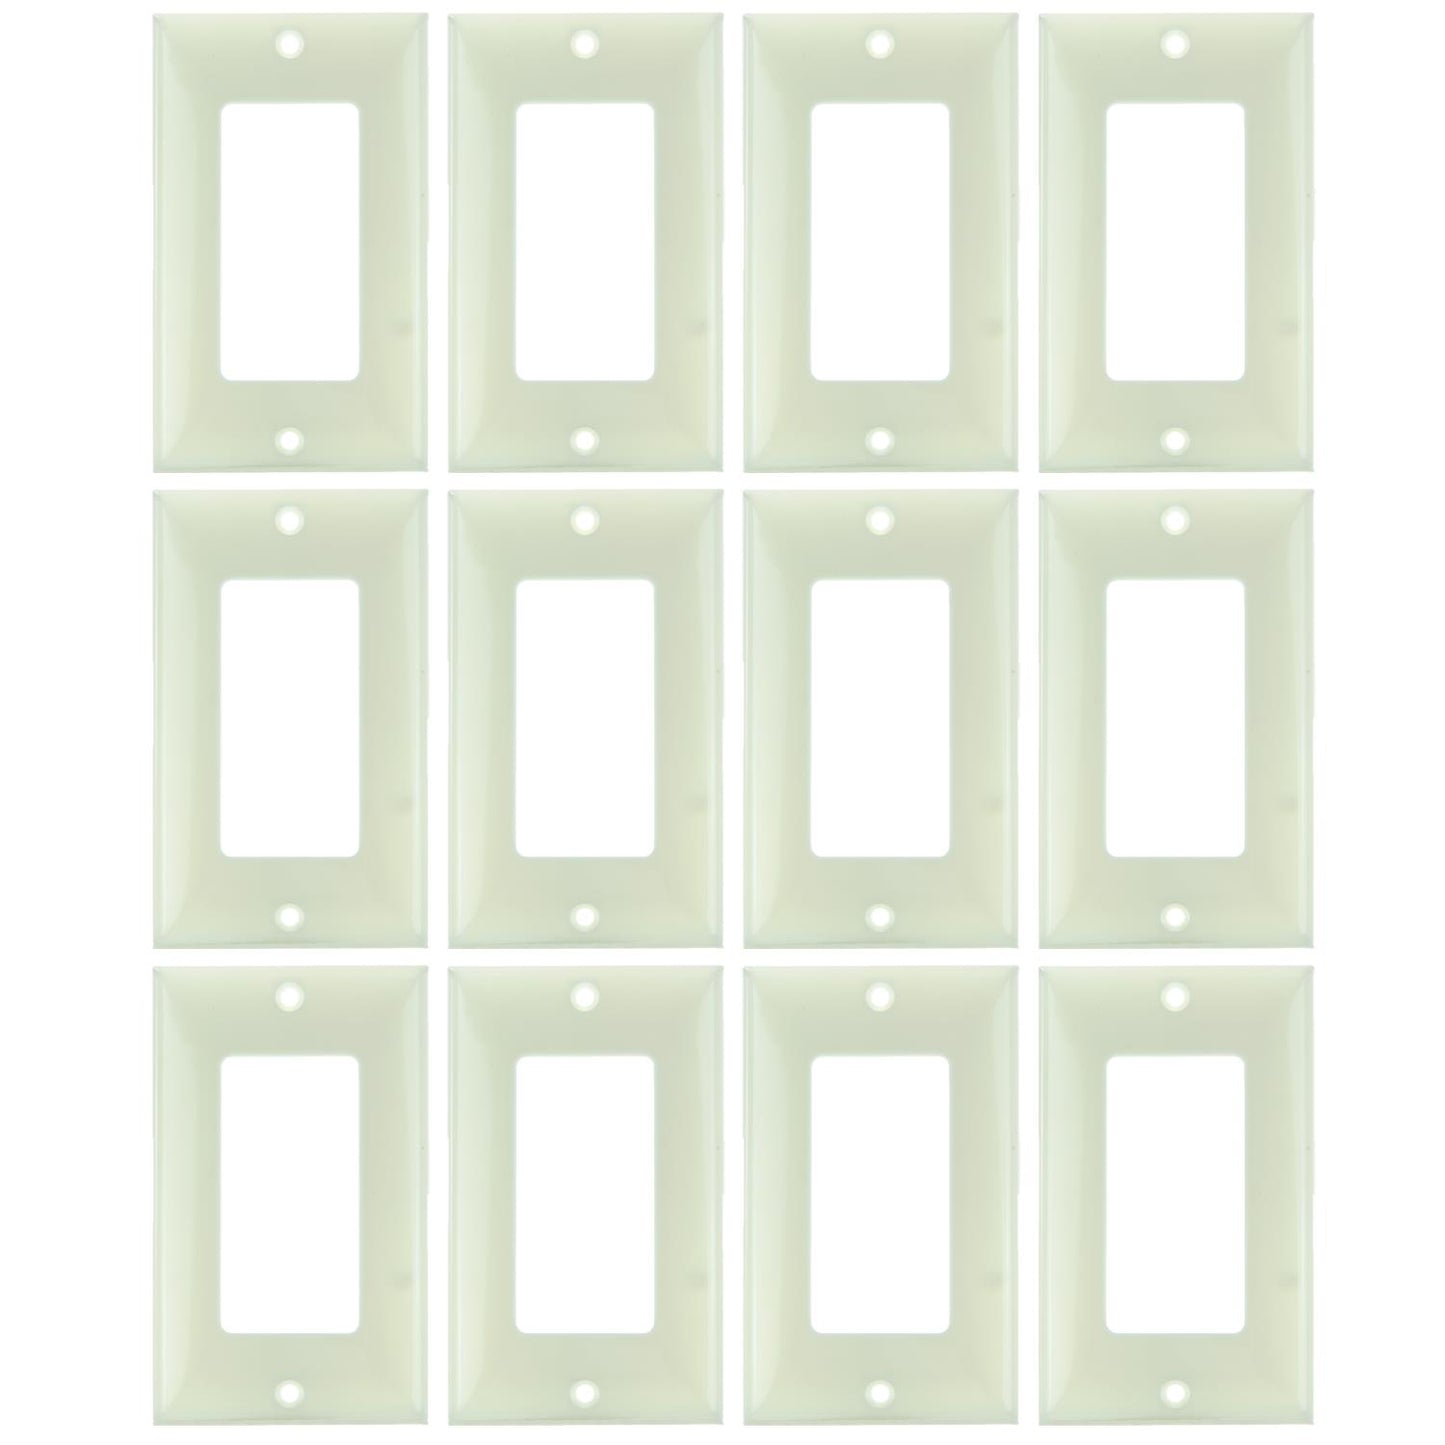 Sunlite E301/A 1 Gang Decorative Switch and Receptacle Plate, Almond